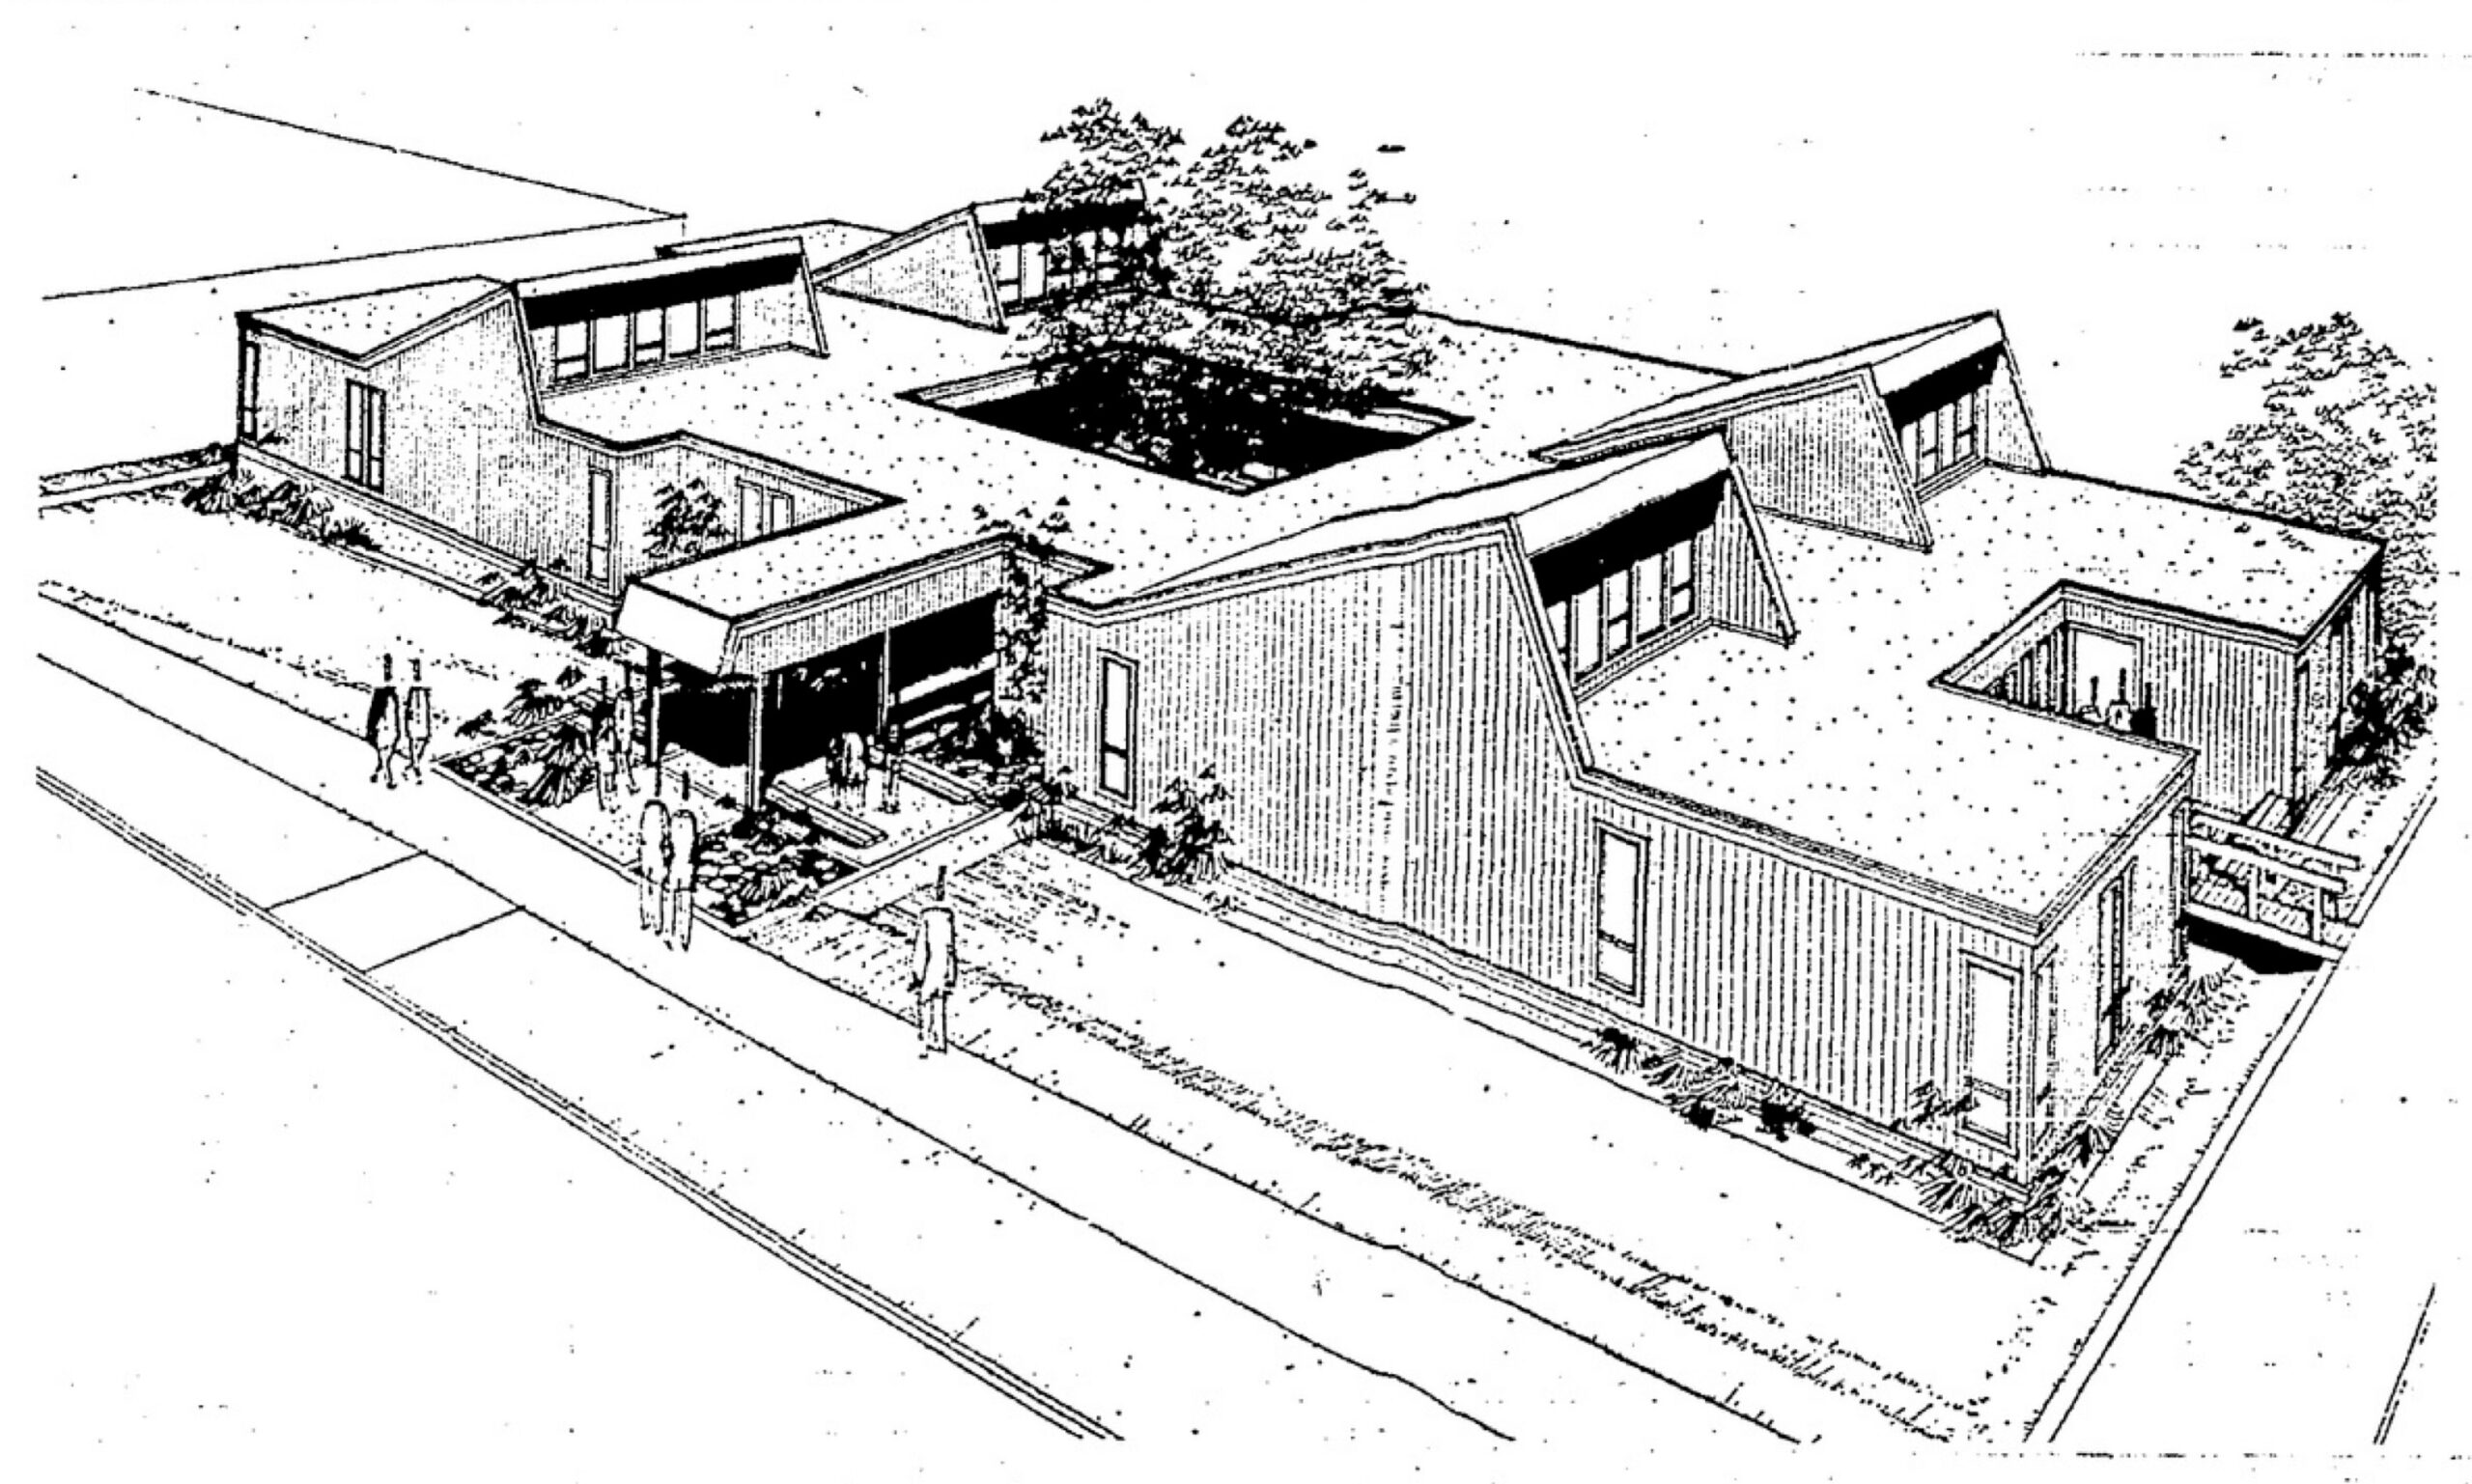 University of Washington Ethnic Cultural Center Rendering, 1970, Courtesy Seattle Times